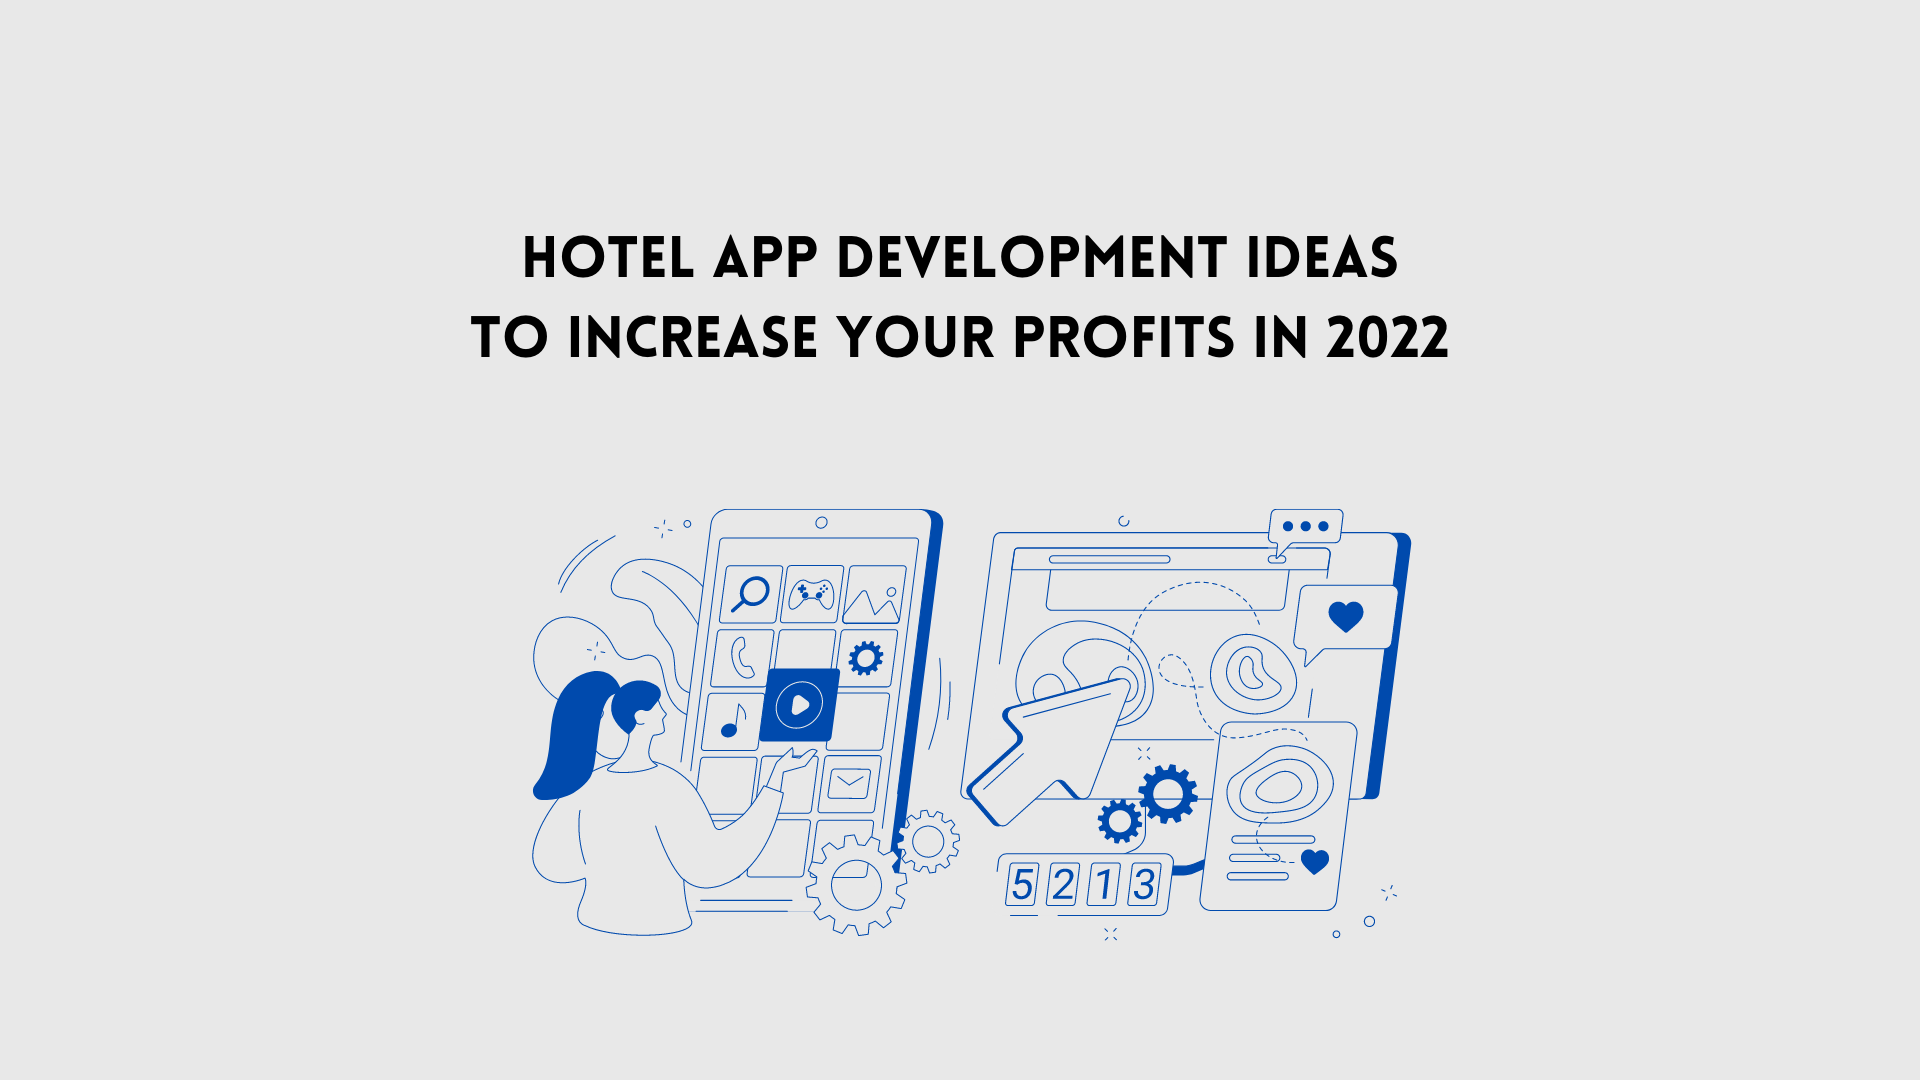 Hotel App Development Ideas to Increase Your Profits in 2022